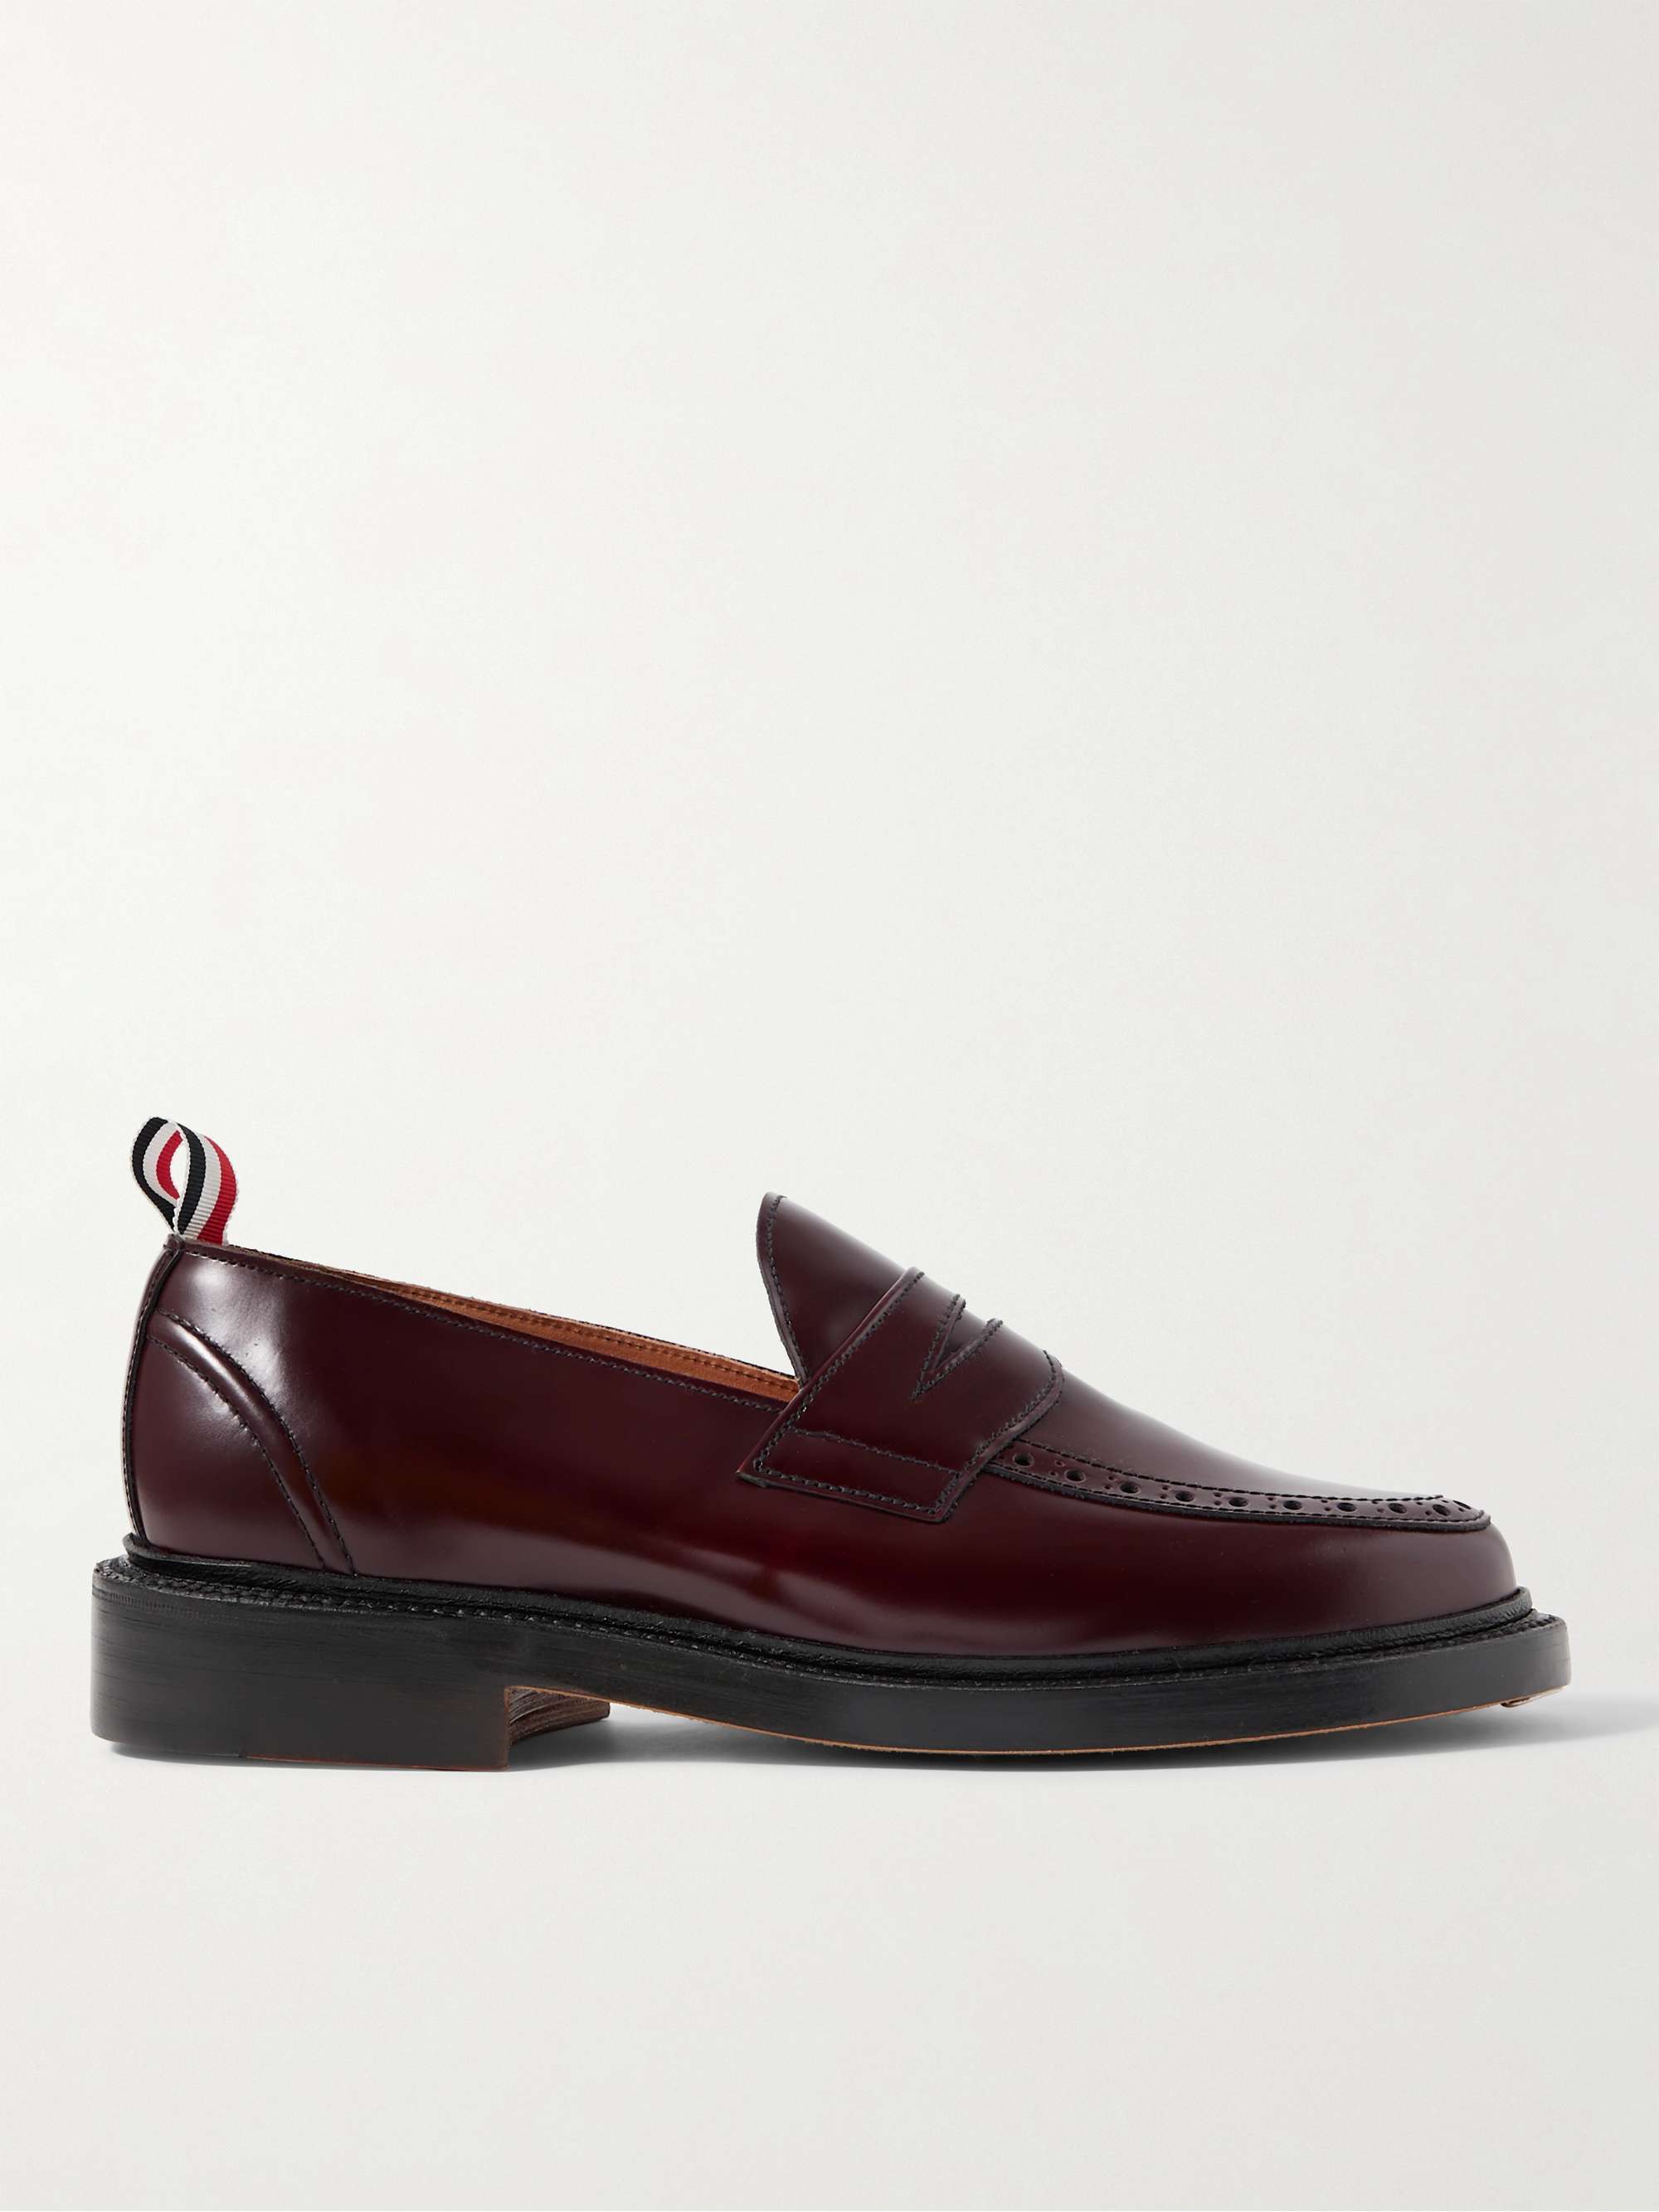 THOM BROWNE Grosgrain-Trimmed Glossed-Leather Penny Loafers